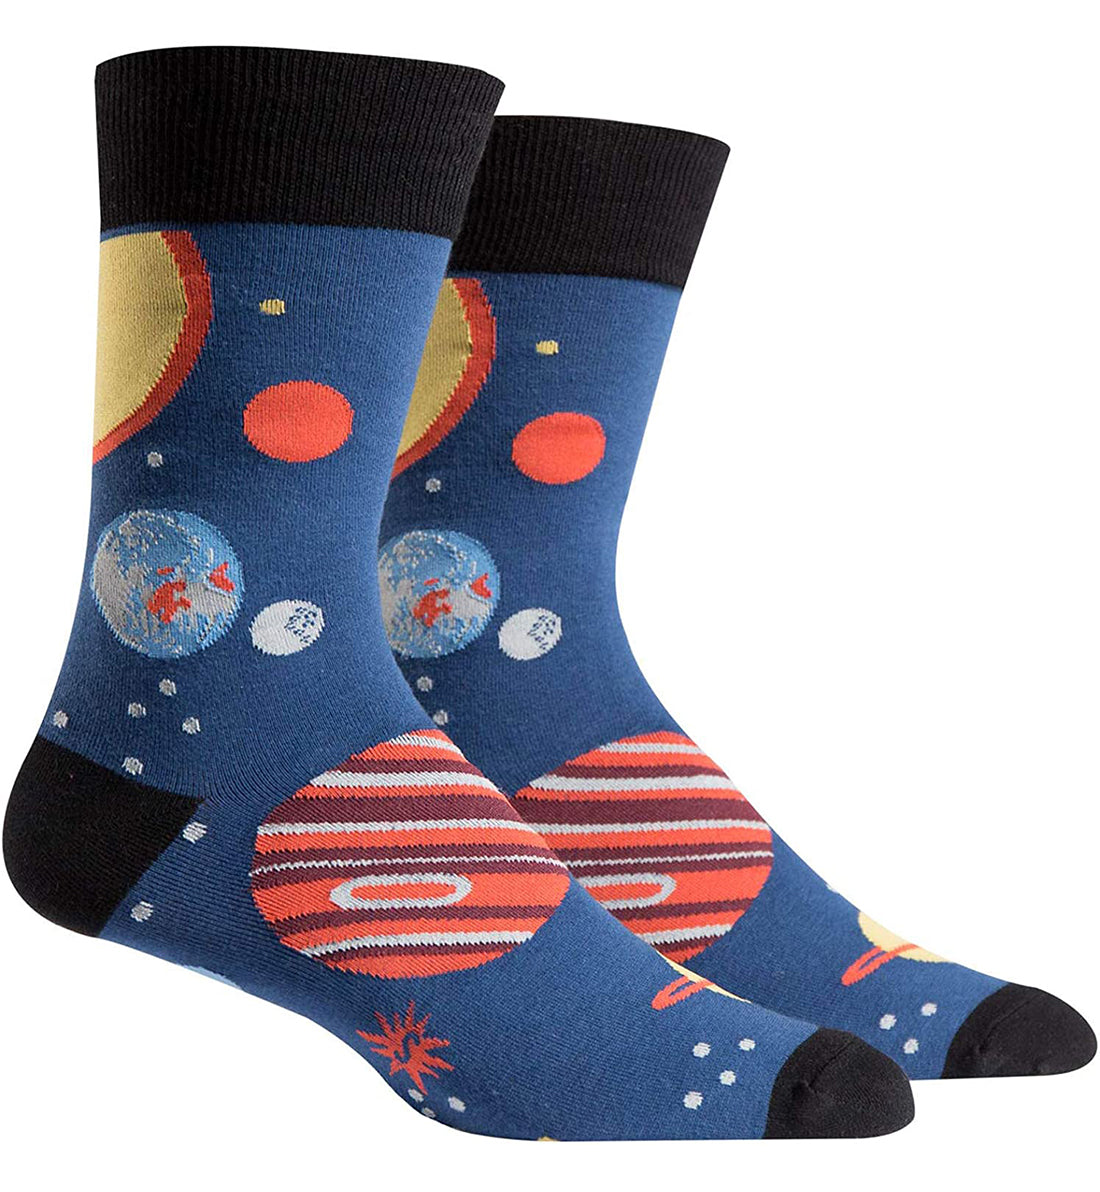 SOCK it to me Men&#39;s Crew Socks (mef0136),Planets - Planets,One Size